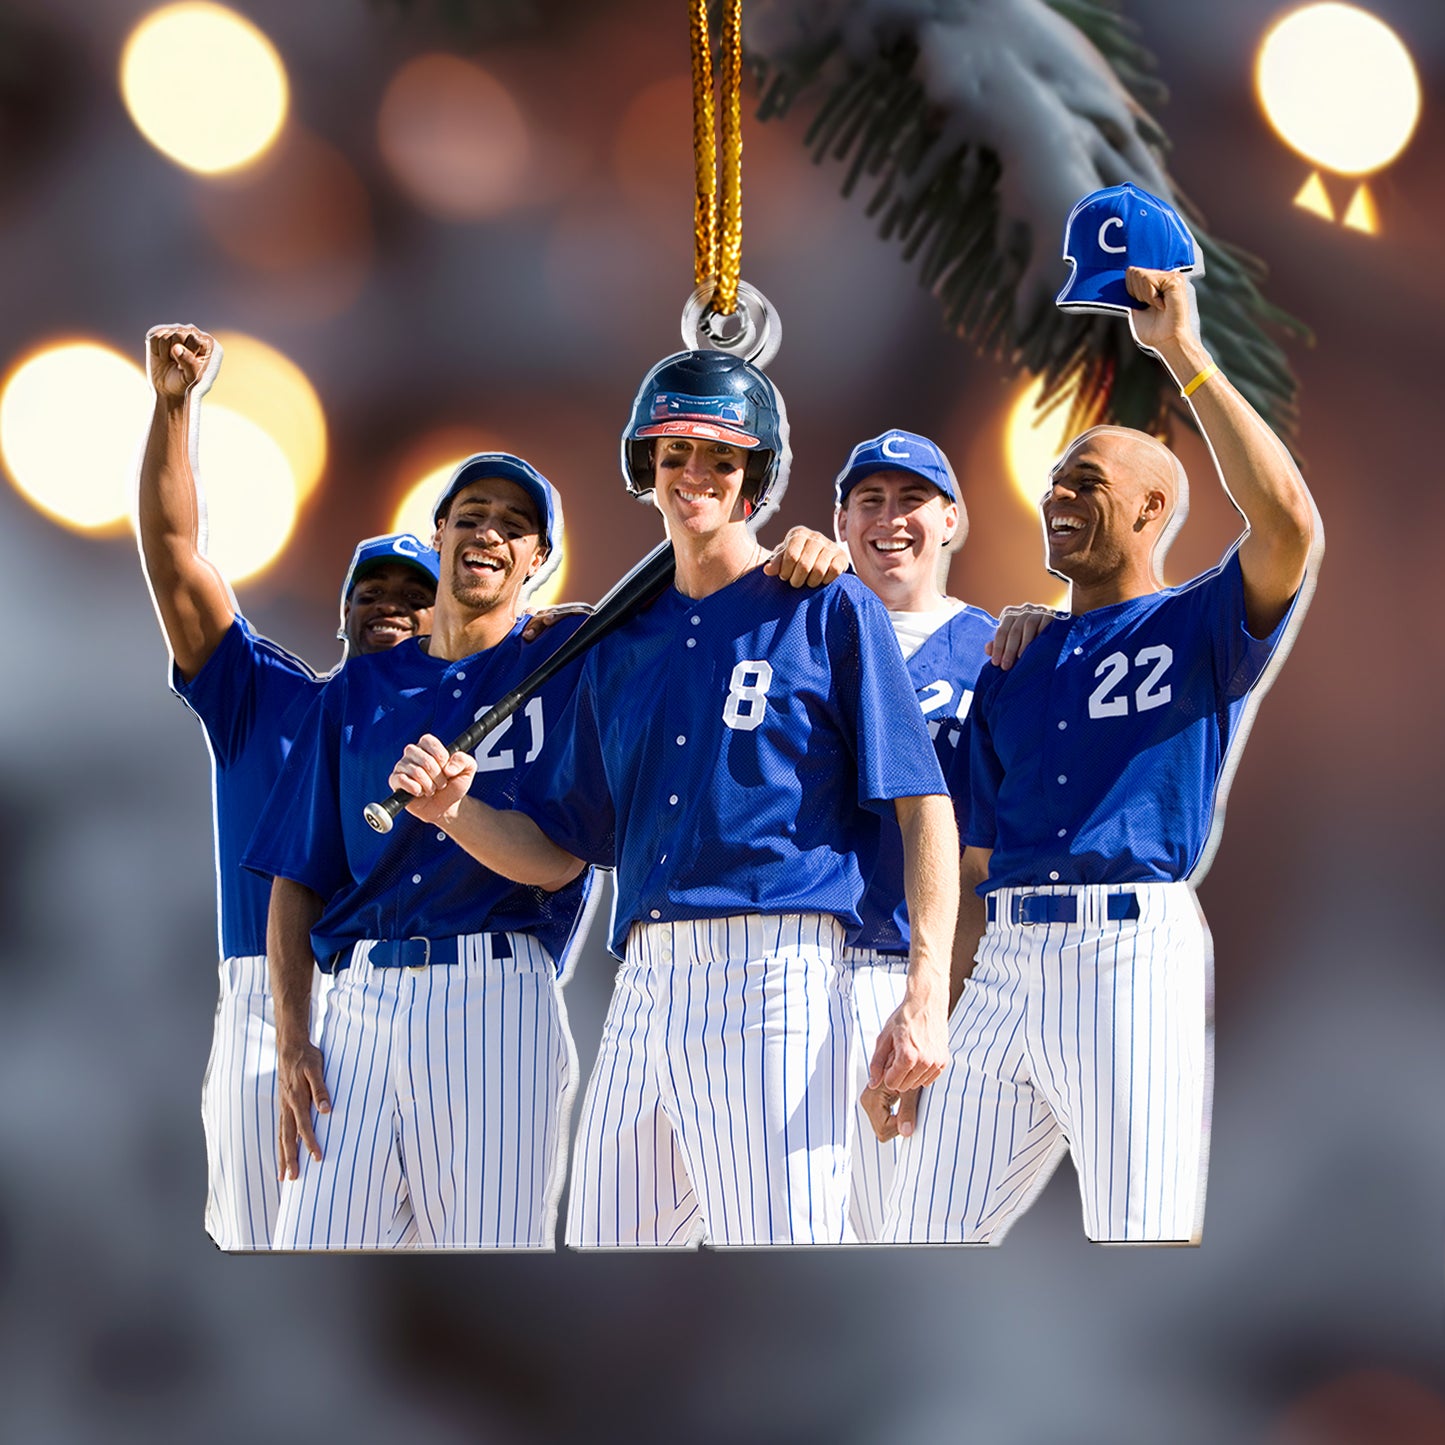 The Best Baseball Team Ever - Personalized Acrylic Photo Ornament